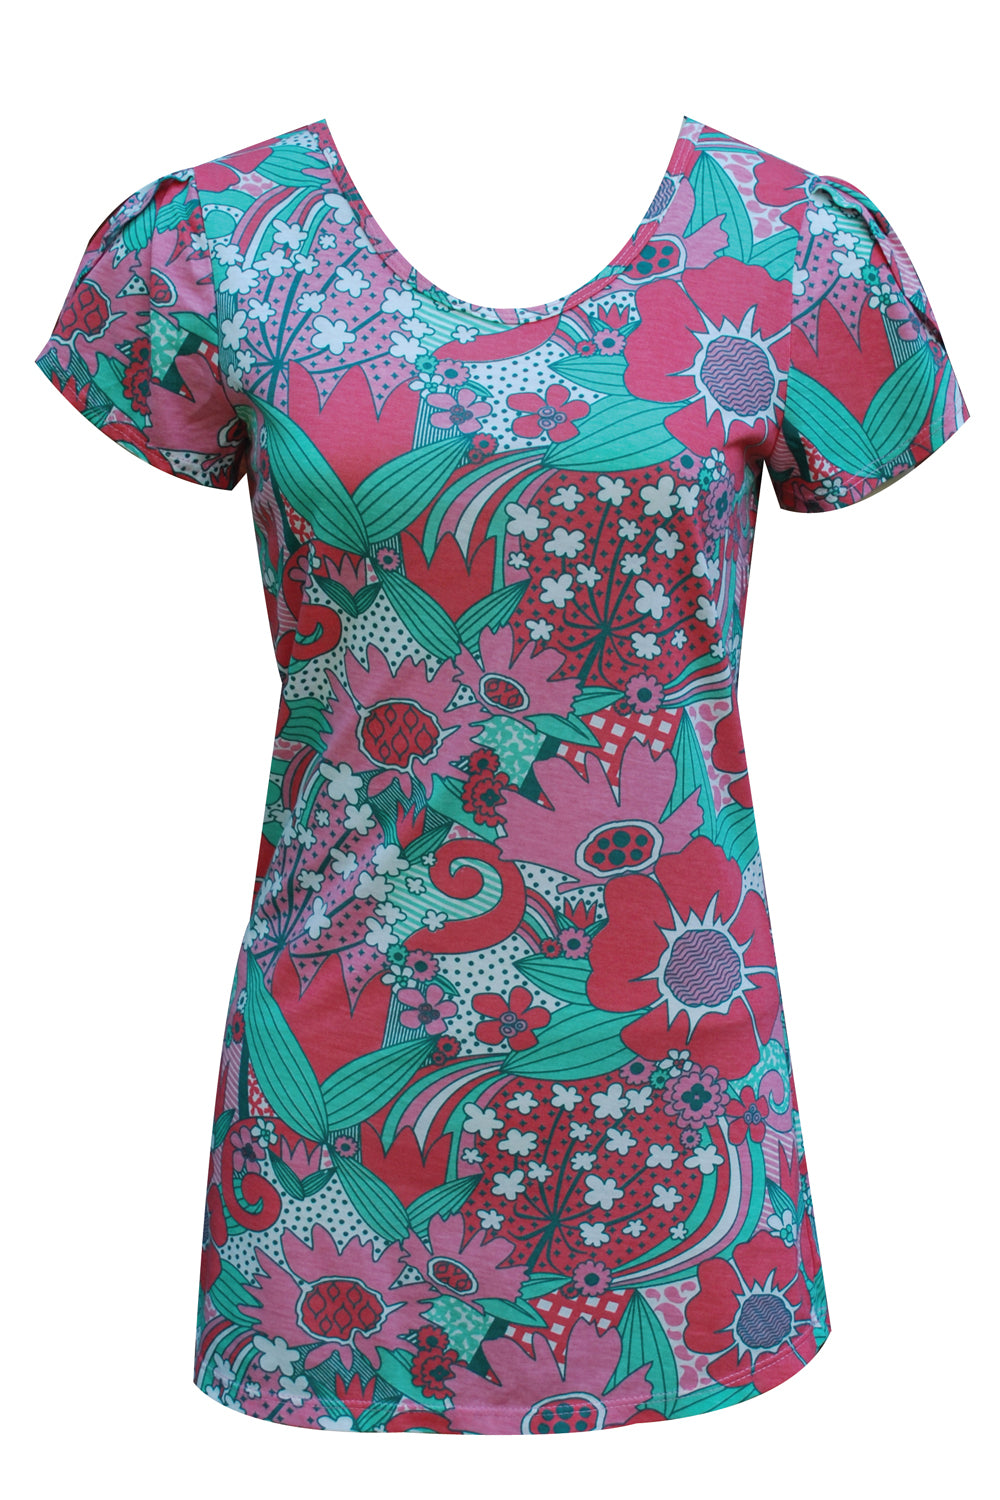 Front view of tulip-sleeved pink and green floral tee